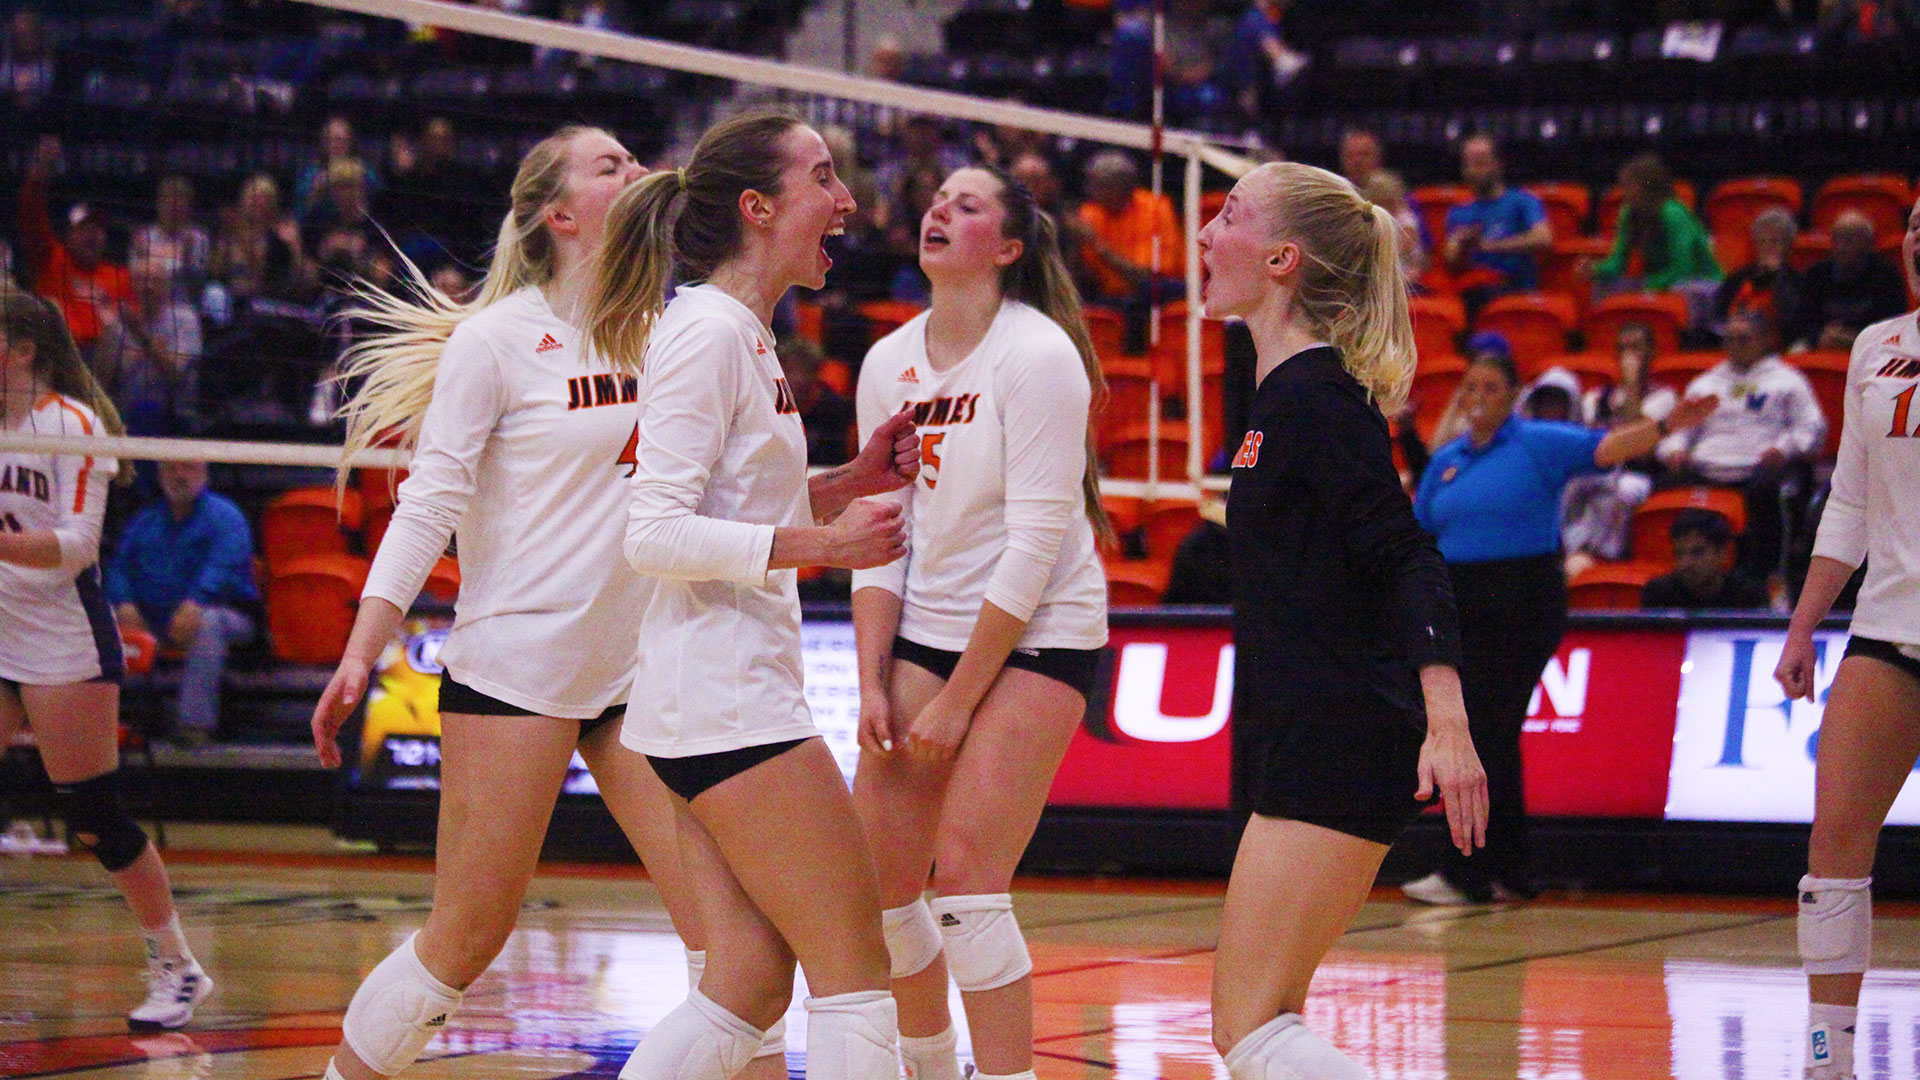 Second-ranked Jimmies begin road swing with win at No. 19 Dordt